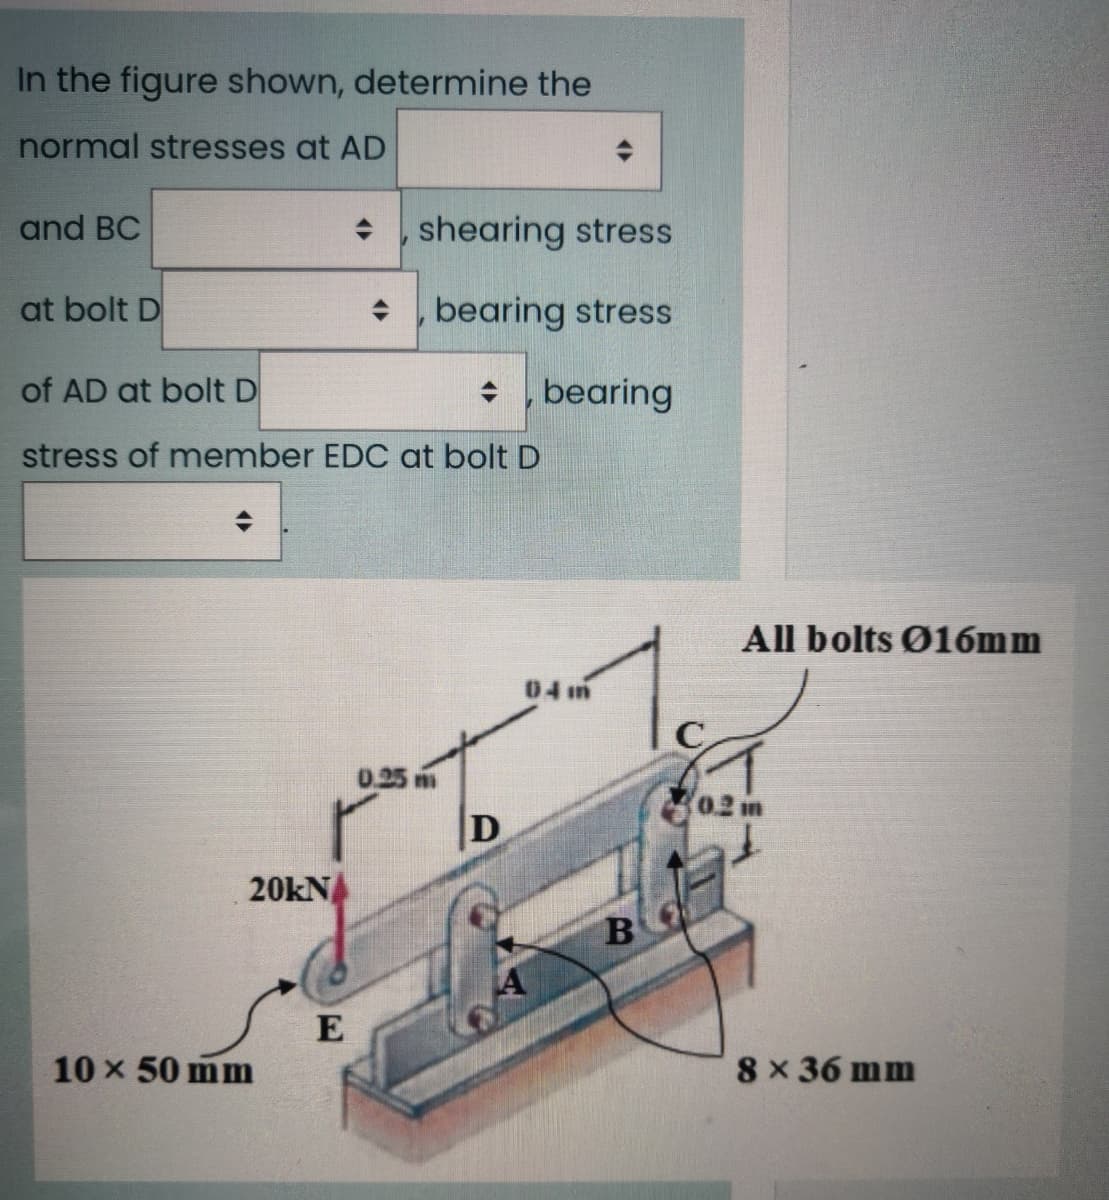 In the figure shown, determine the
normal stresses at AD
and BC
+ , shearing stress
at bolt D
bearing stress
of AD at bolt D
* bearing
stress of member EDC at bolt D
All bolts Ø16mm
04 im
C
0.25
02 m
20kN
E
10 x 50 mm
8 x 36 mm
